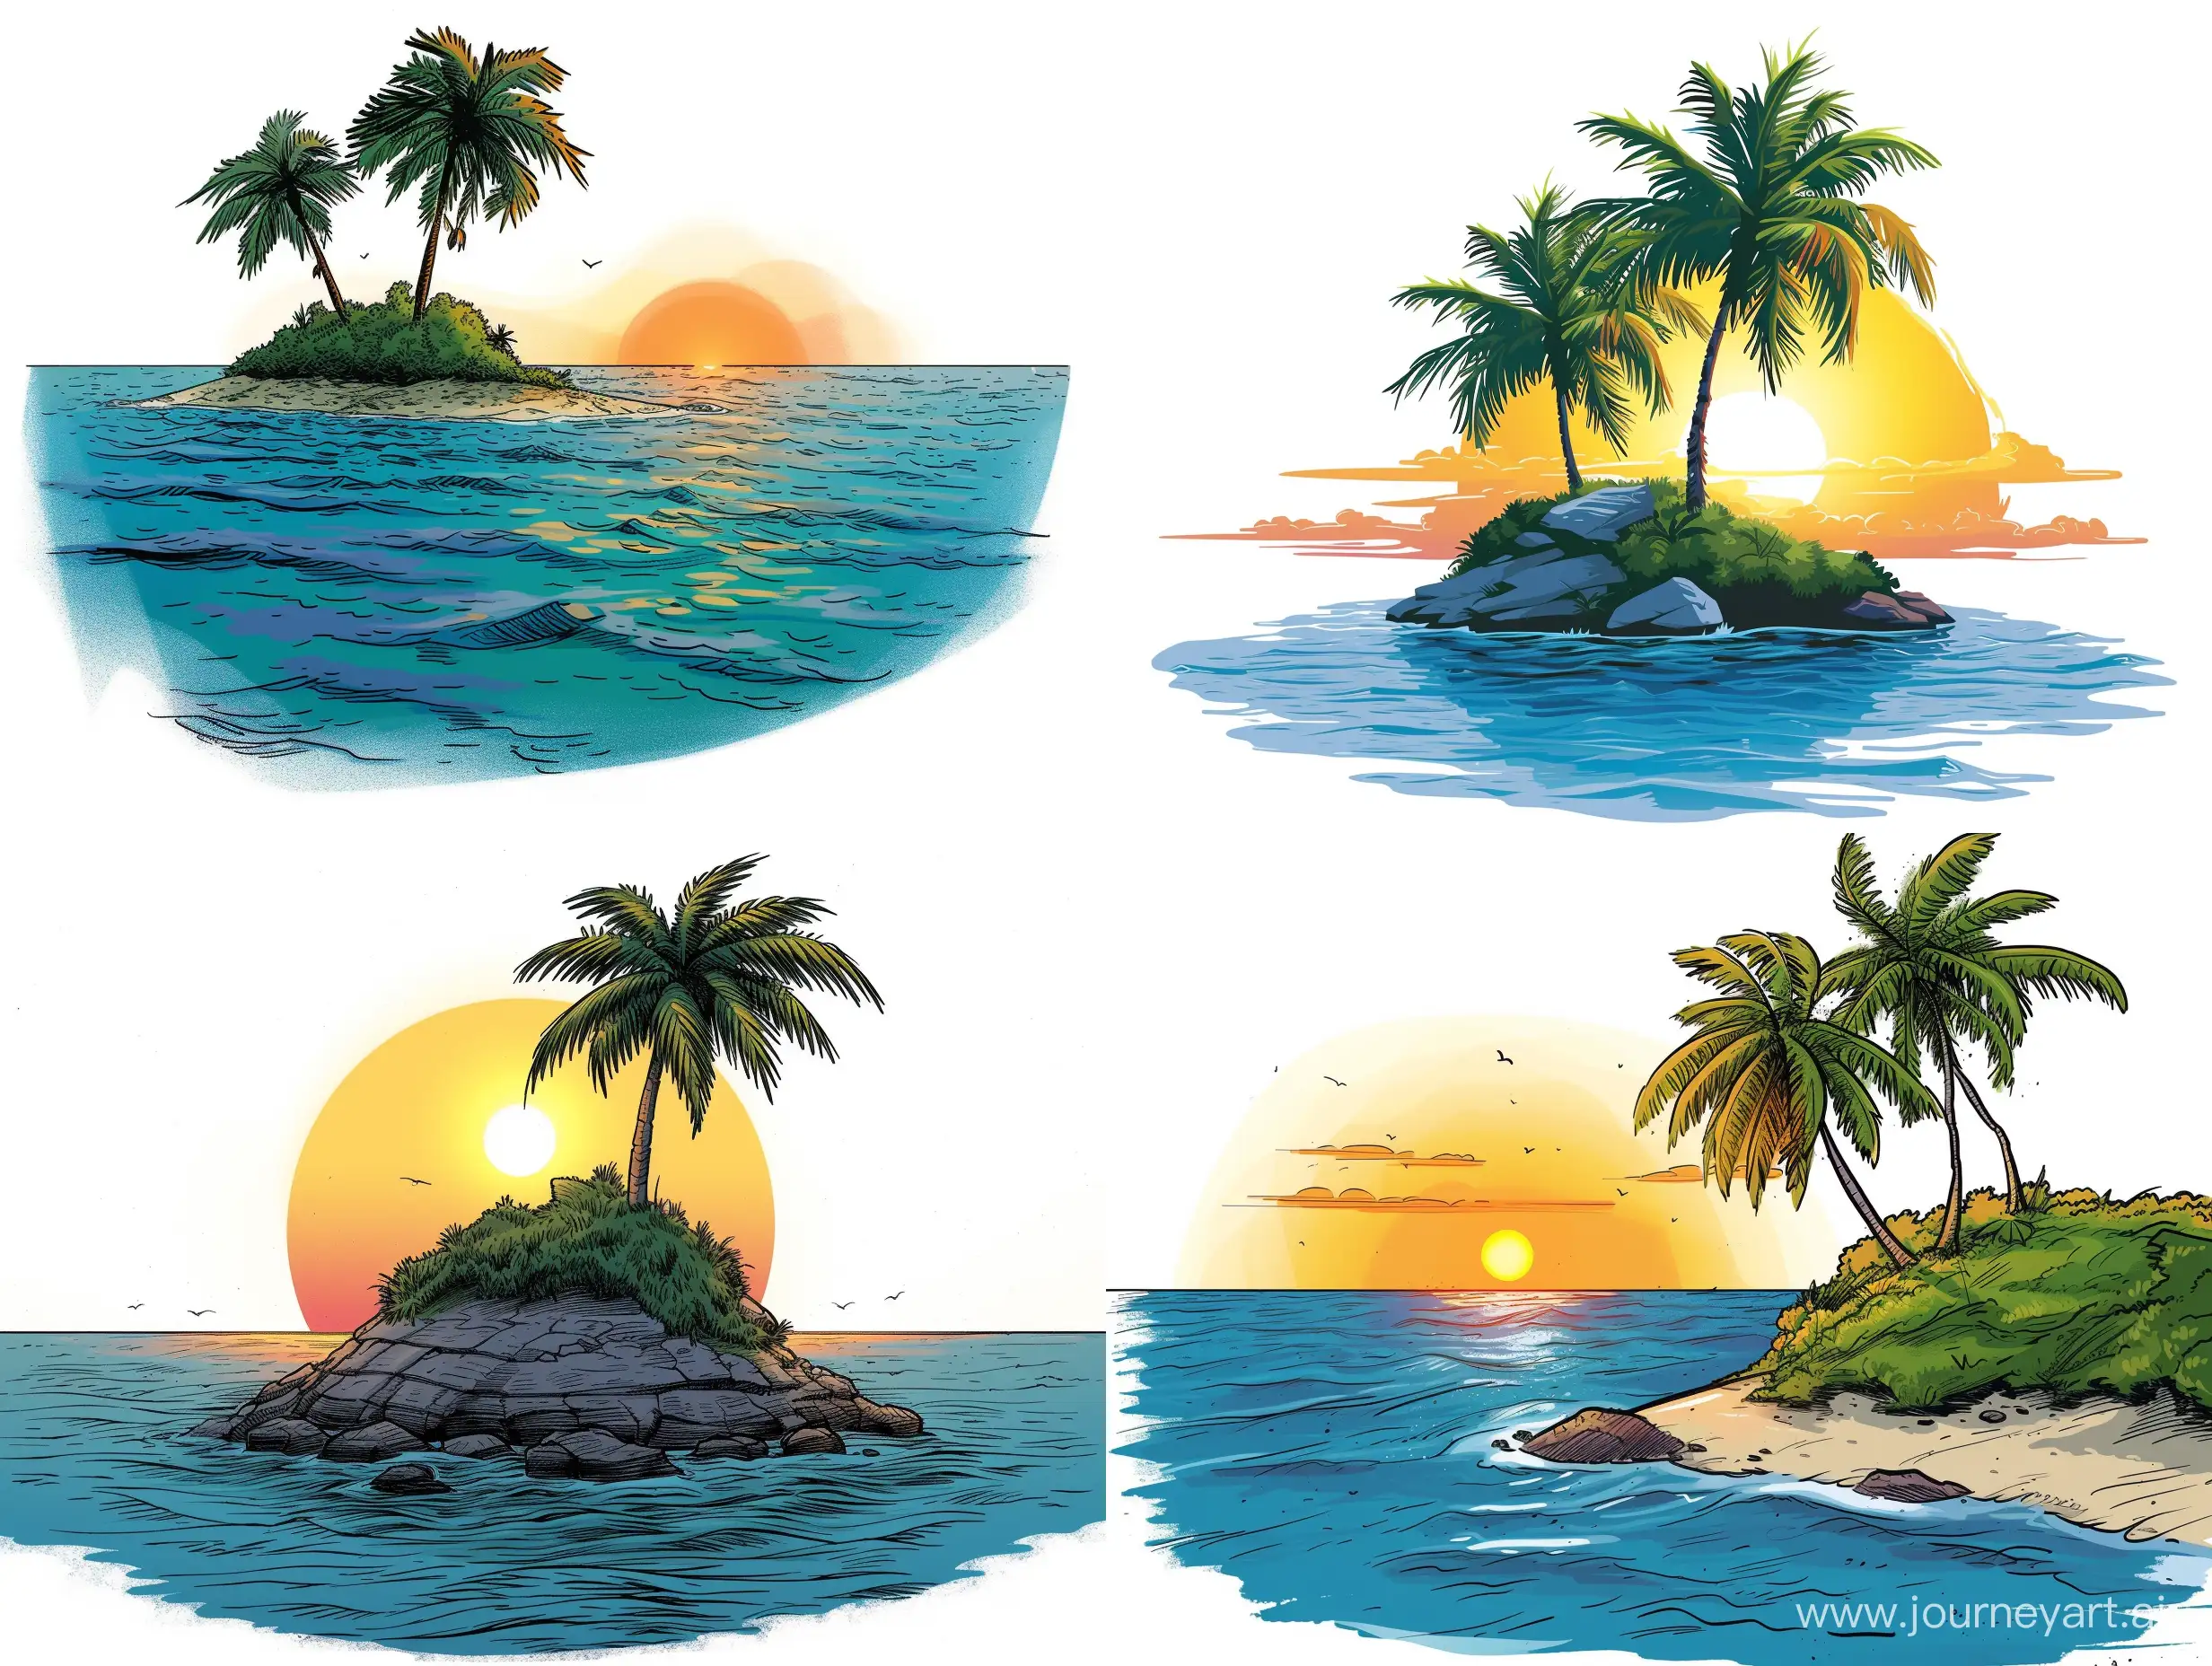 Tropical-Sunrise-on-a-Small-Island-Vibrant-Comic-Book-Style-Art-with-Coconut-Palms